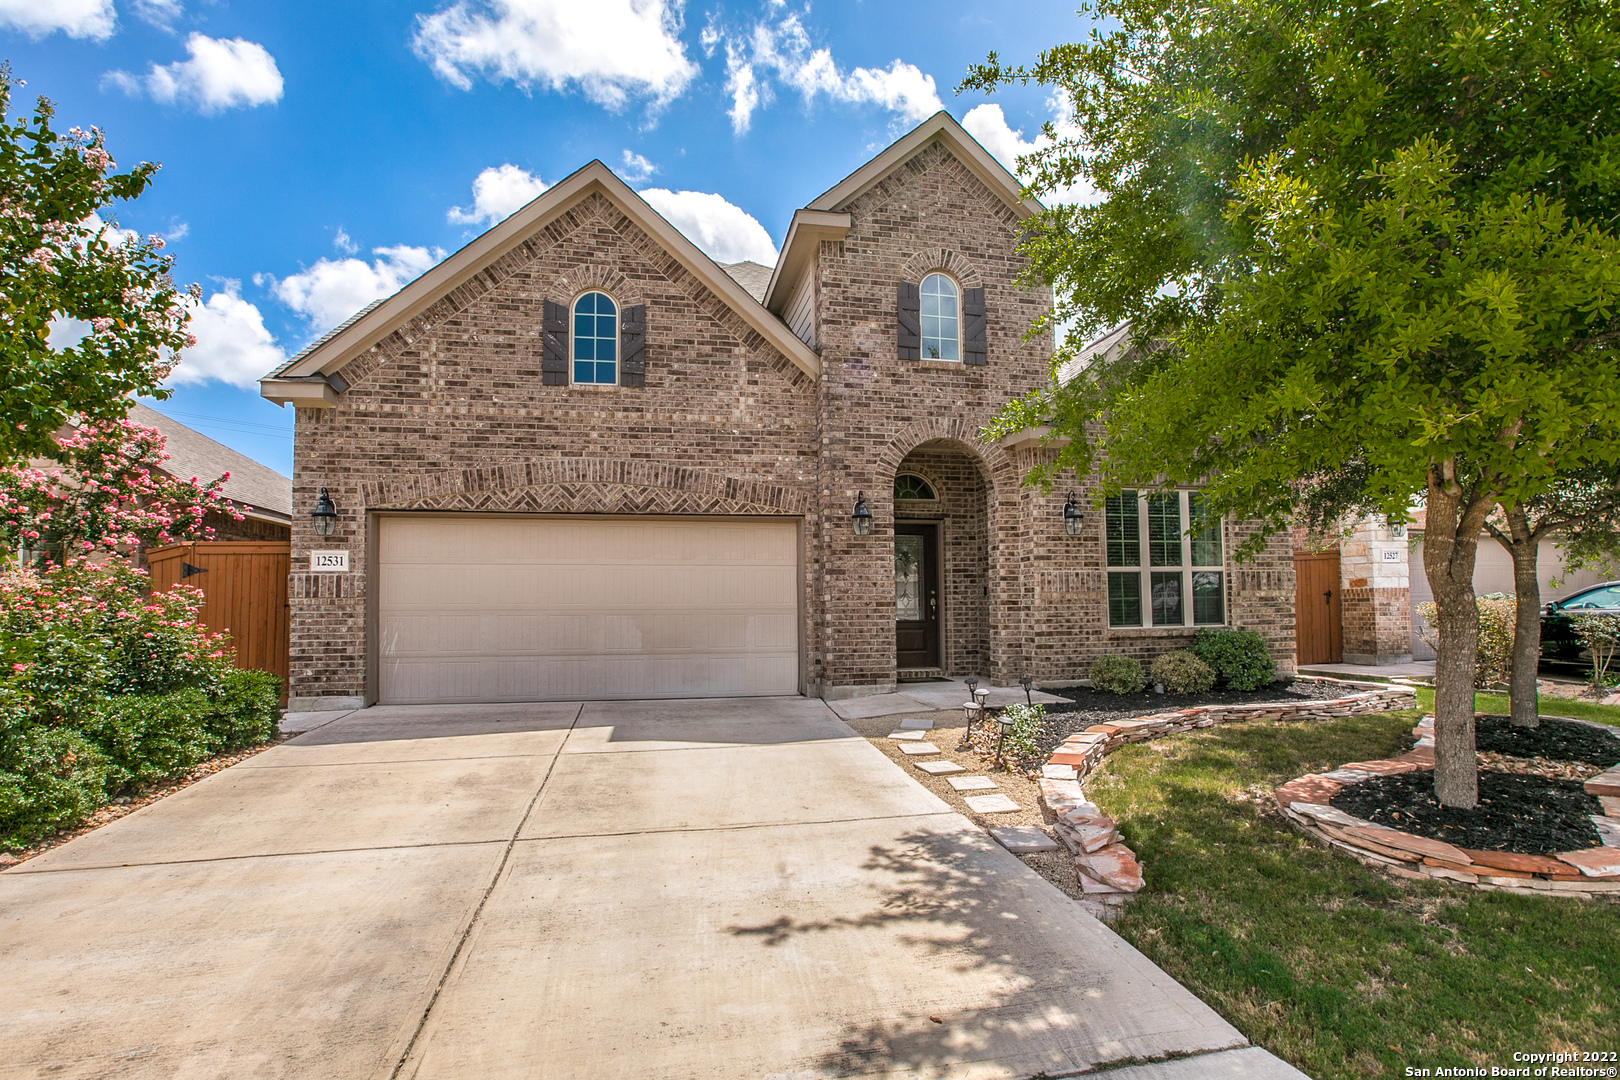 OPEN HOUSE, Friday 6/24 from 4-7 and Saturday 6/25 from 12-3. Greenbelt stunner in Stillwater Ranch! Bright and open floor plan with 4 bedrooms and 3.5 baths. This home features an elegant & inviting entry, high ceilings, study, game room and downstairs primary suite. Beautifully appointed granite kitchen with gas cooking and a large island perfect for entertaining and family gatherings. Check out the gorgeous greenbelt view with no back neighbors!! Easy walk to sought after Scarborough Elementary School and don't miss the amazing neighborhood amenity center. Convenient to Lackland AFB, restaurants, shopping and highways.